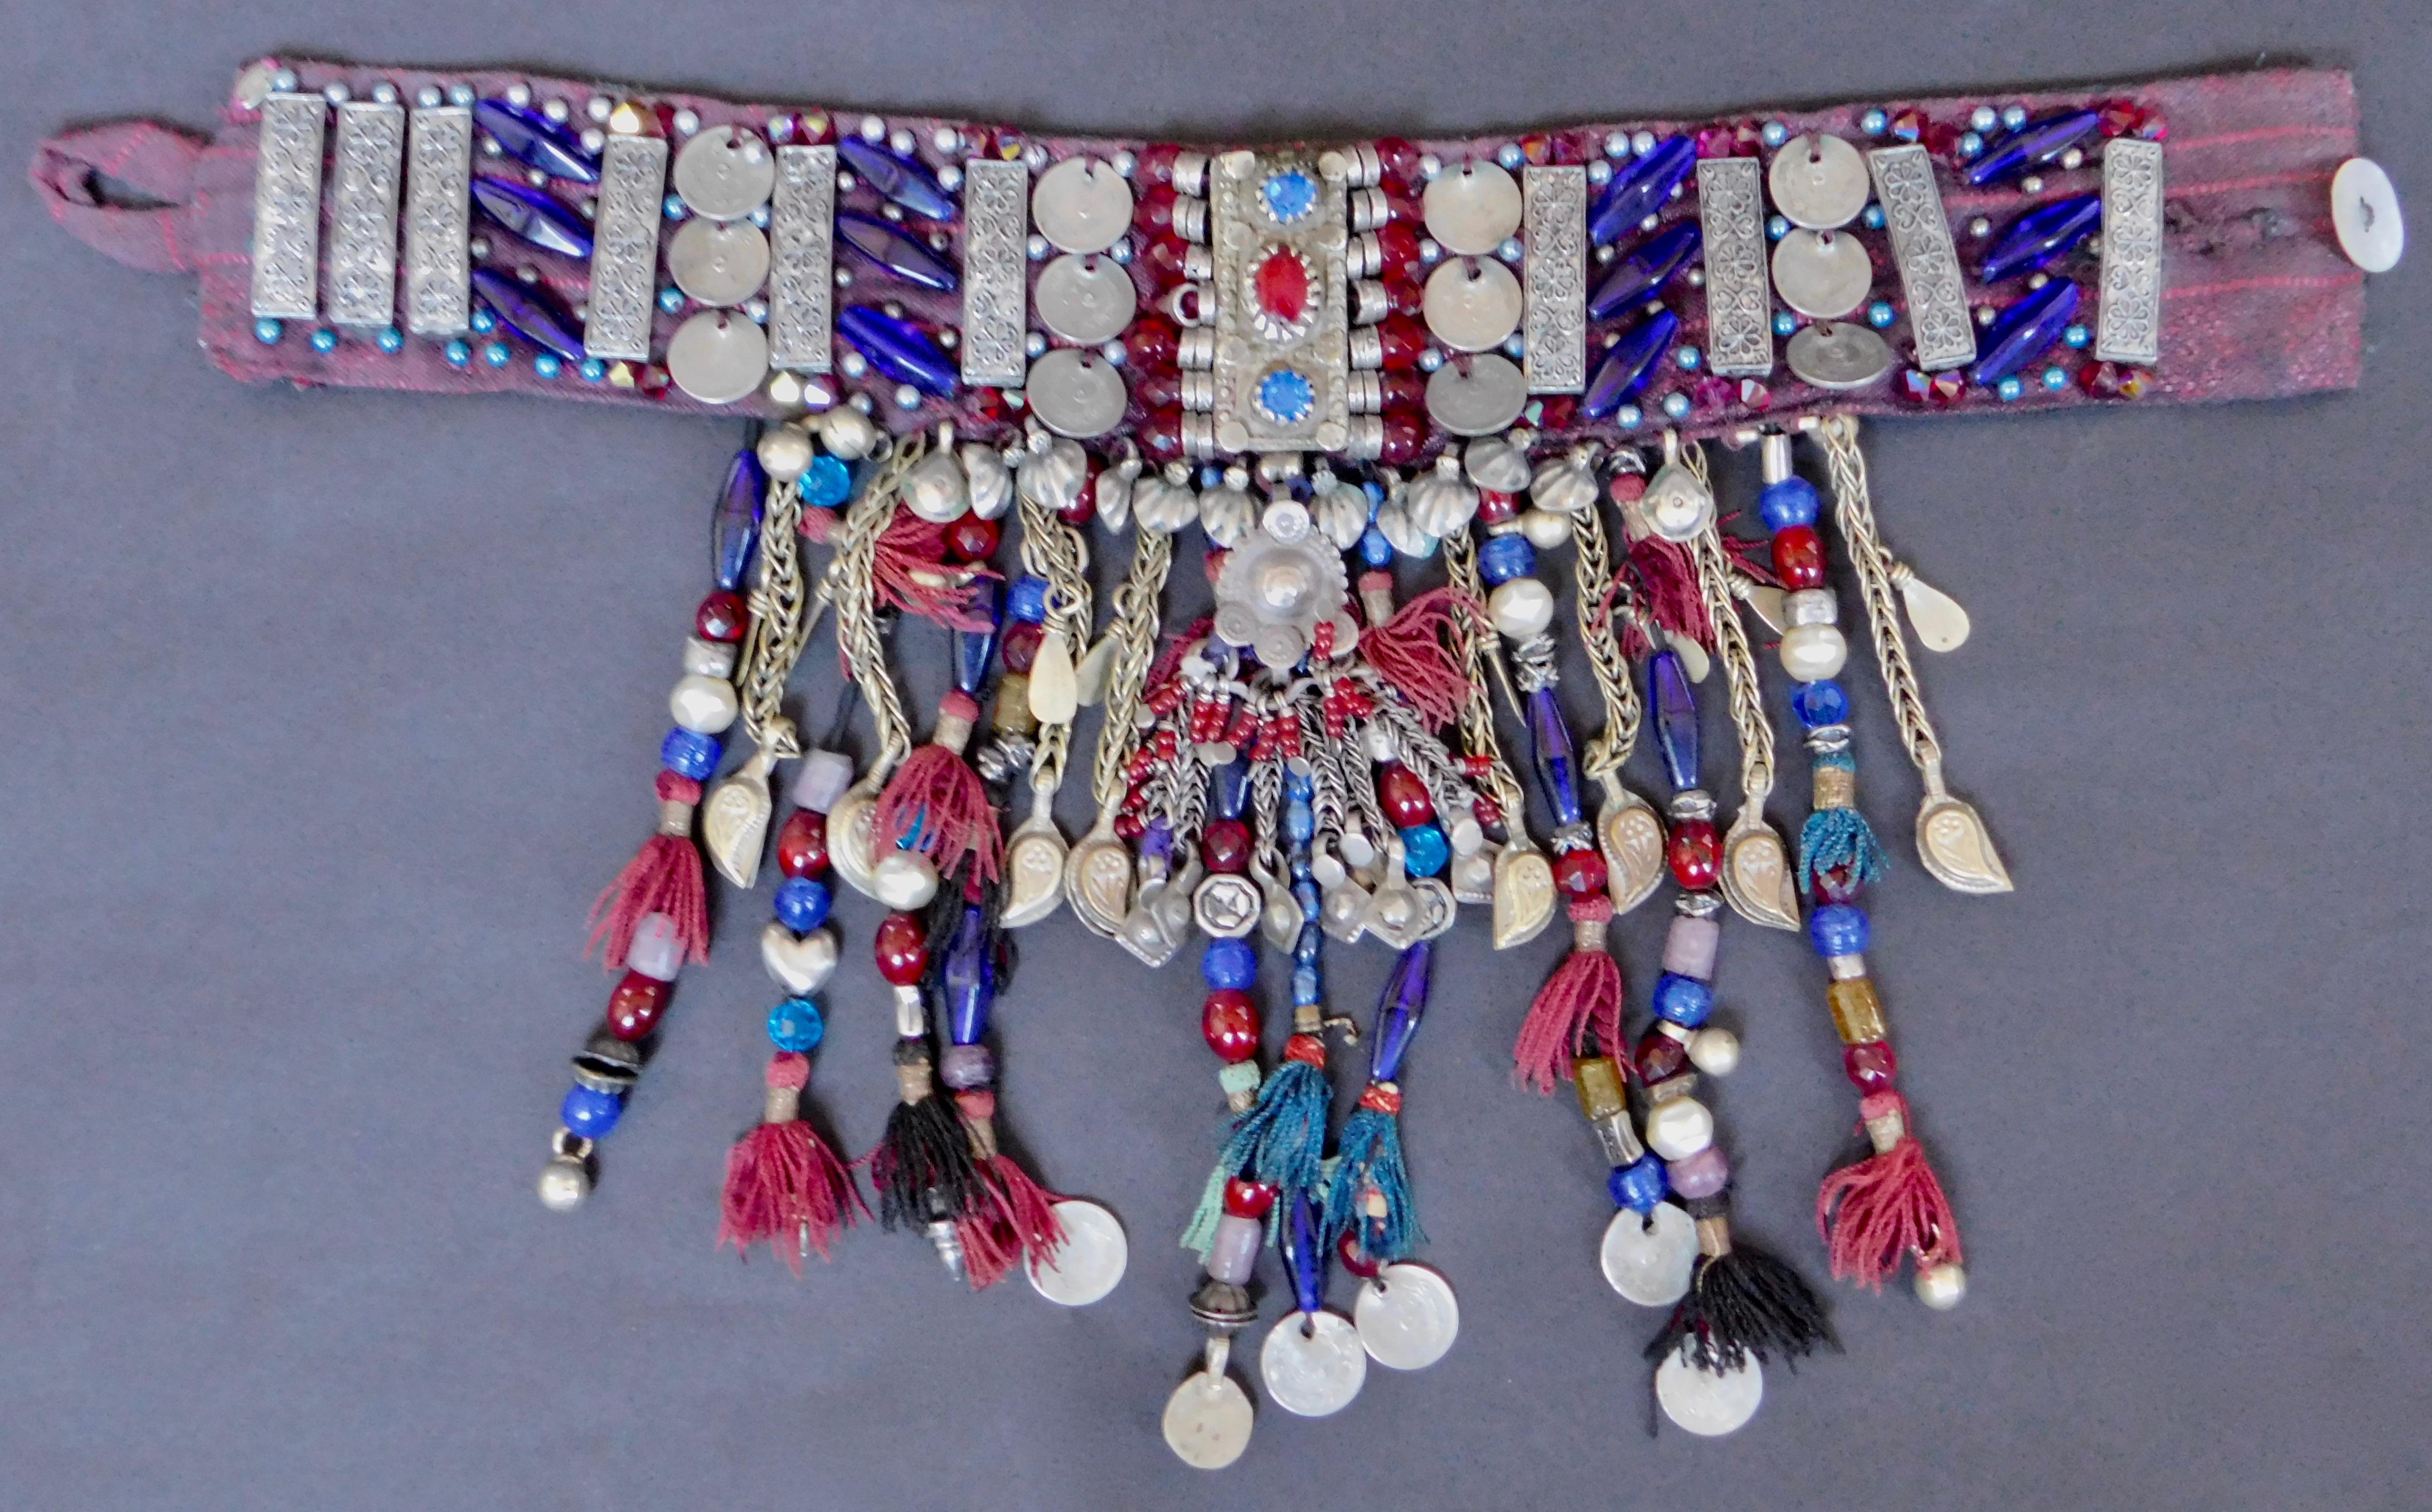 An ethnic style choker necklace made in the 1970's by a Belgian designer. The choker is constructed from soft fabric which is adorned with hand sewn antique Turkish coins and tassels as well as glass beads and chains. absolutely one of a kind.